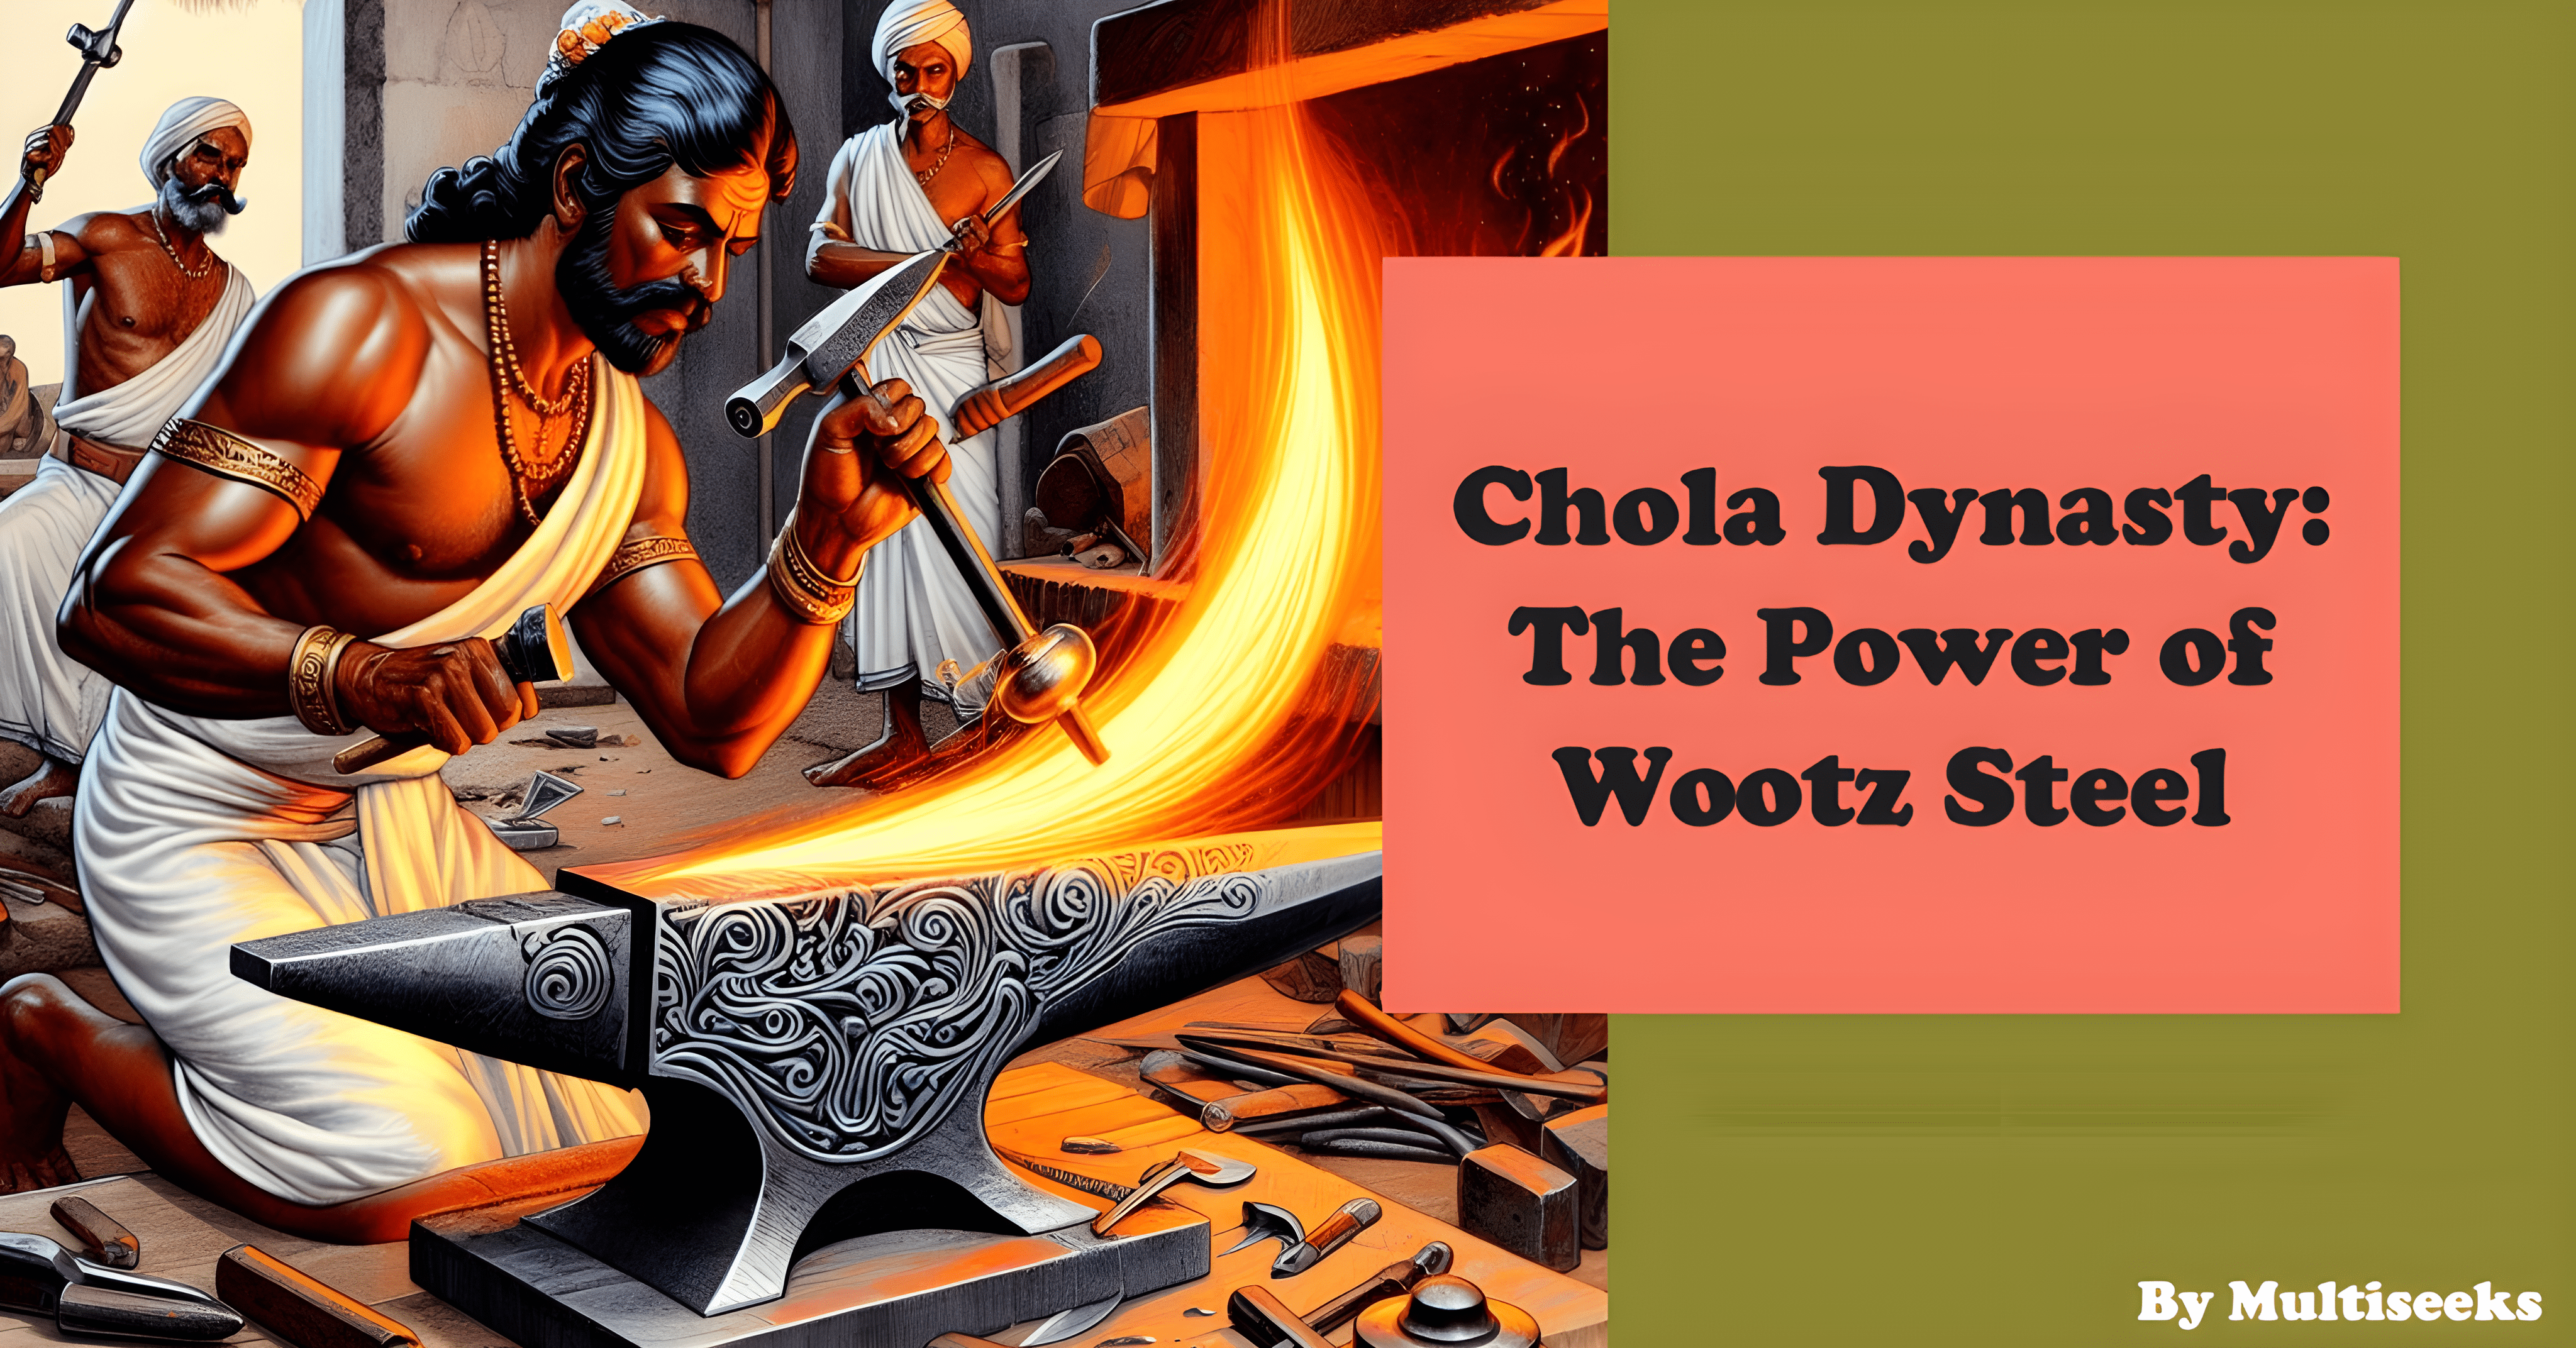 You are currently viewing Chola Dynasty: The Power of Wootz Steel